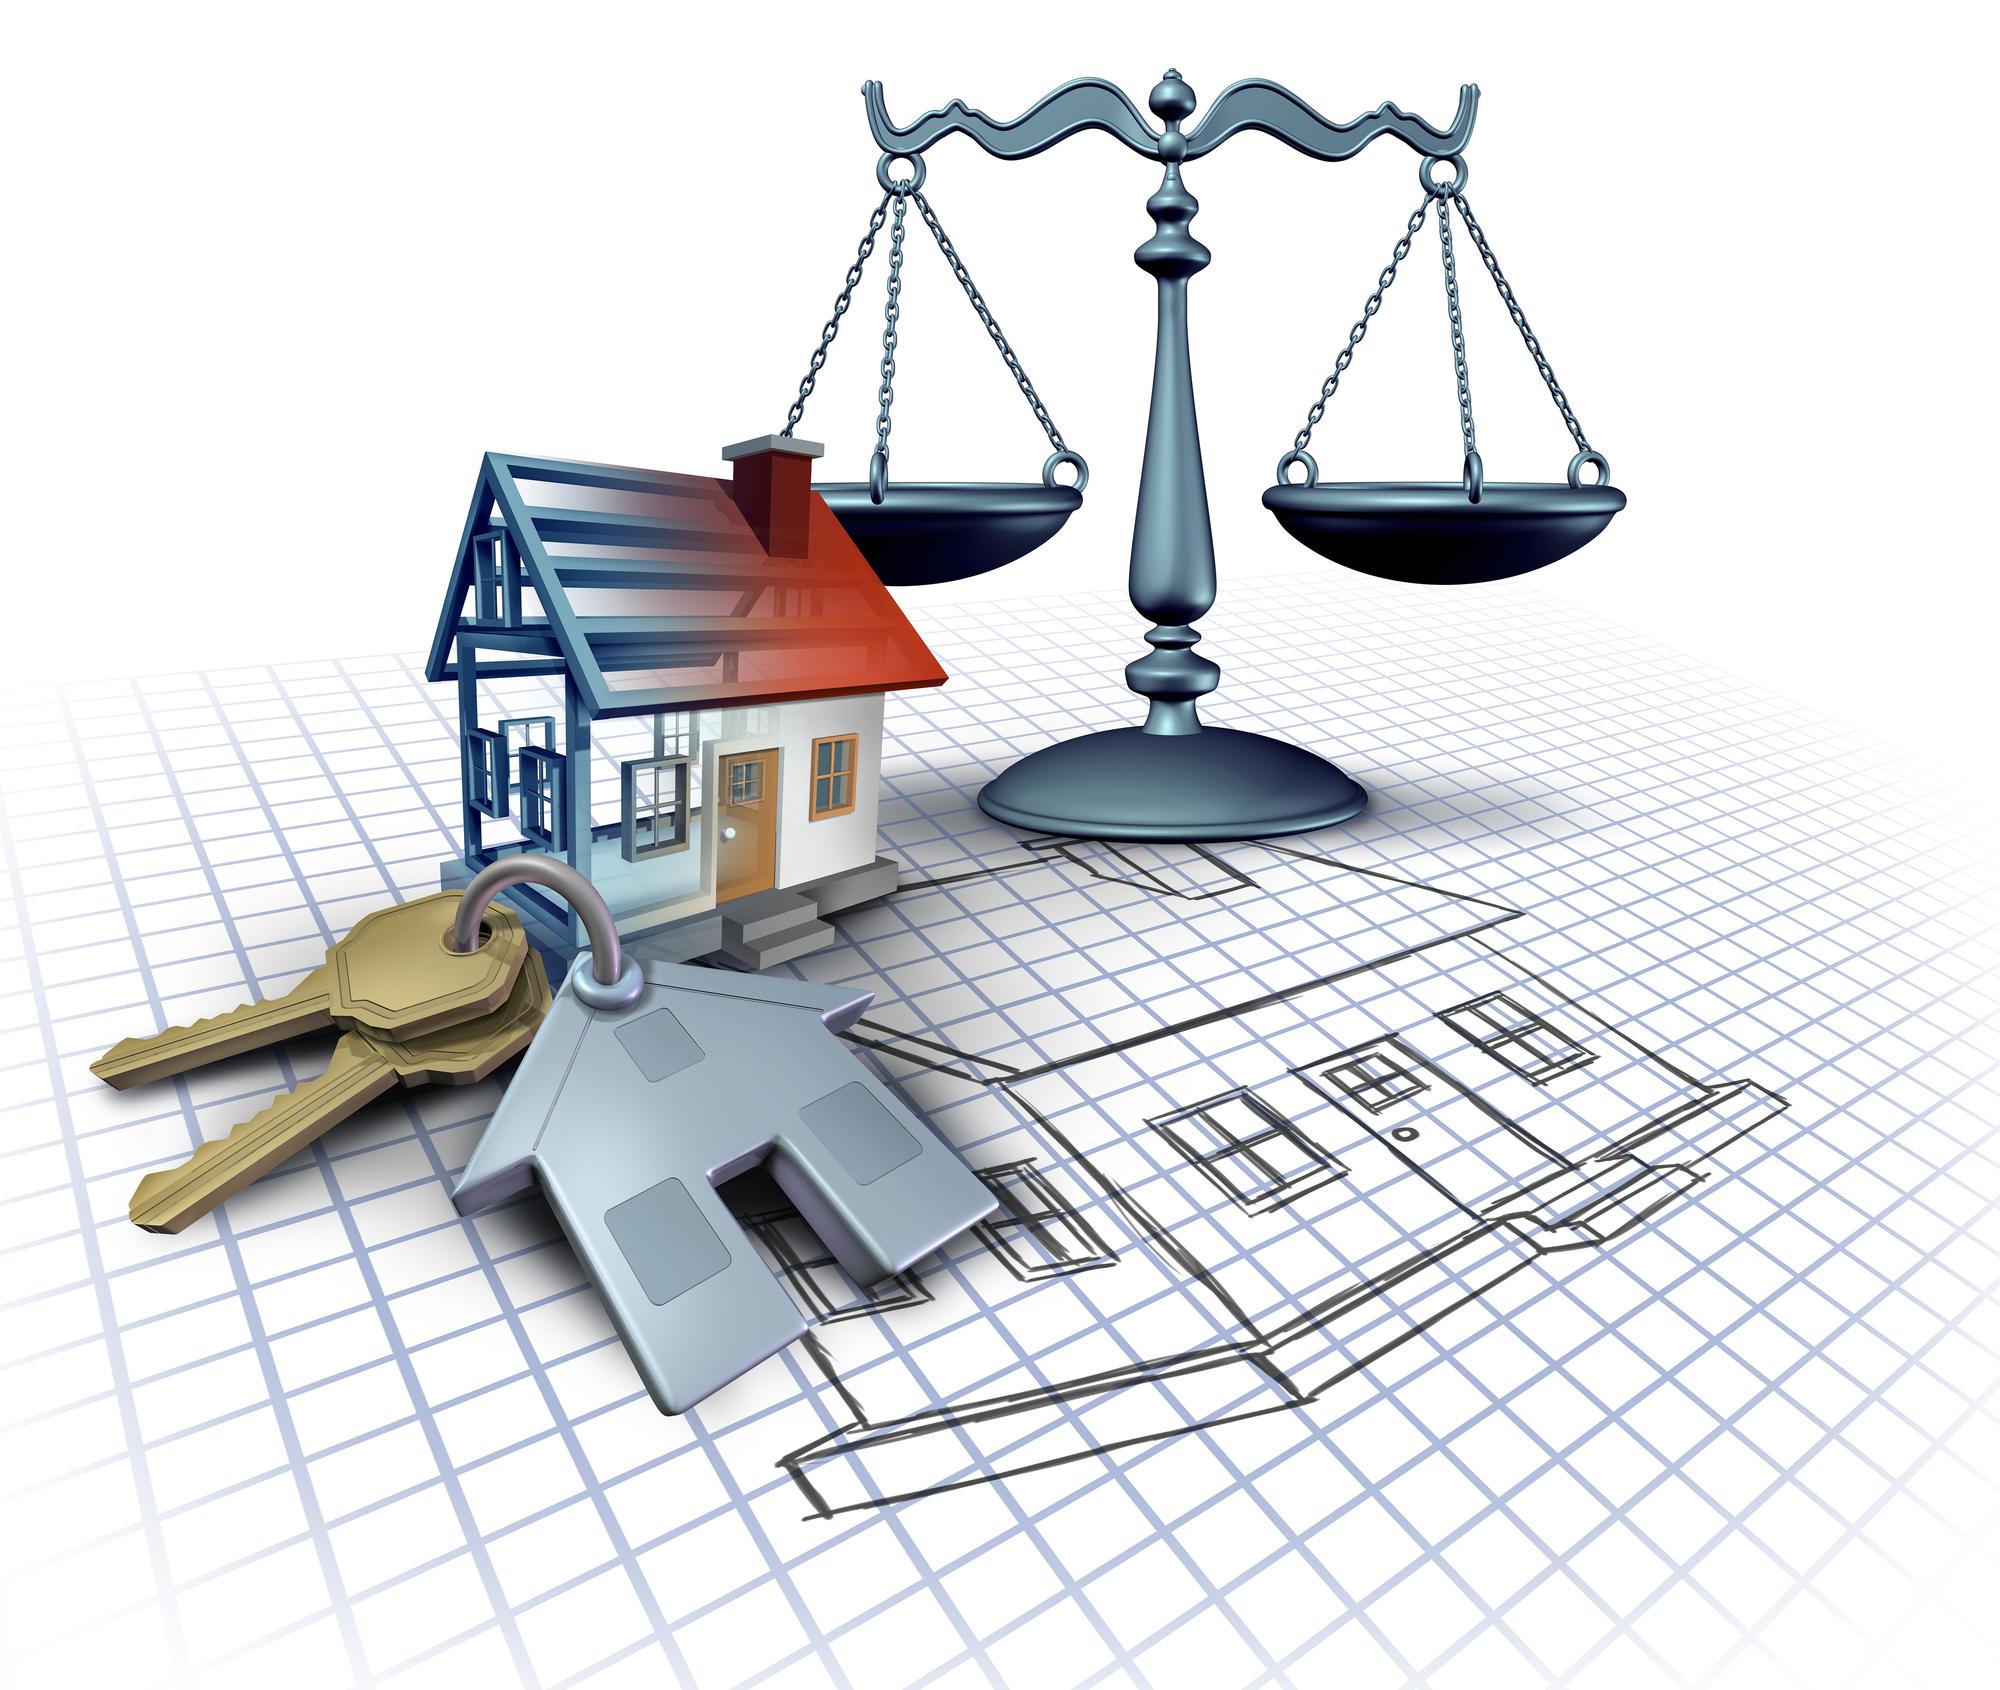 Real Estate Legal Considerations: Essential or Superfluous?